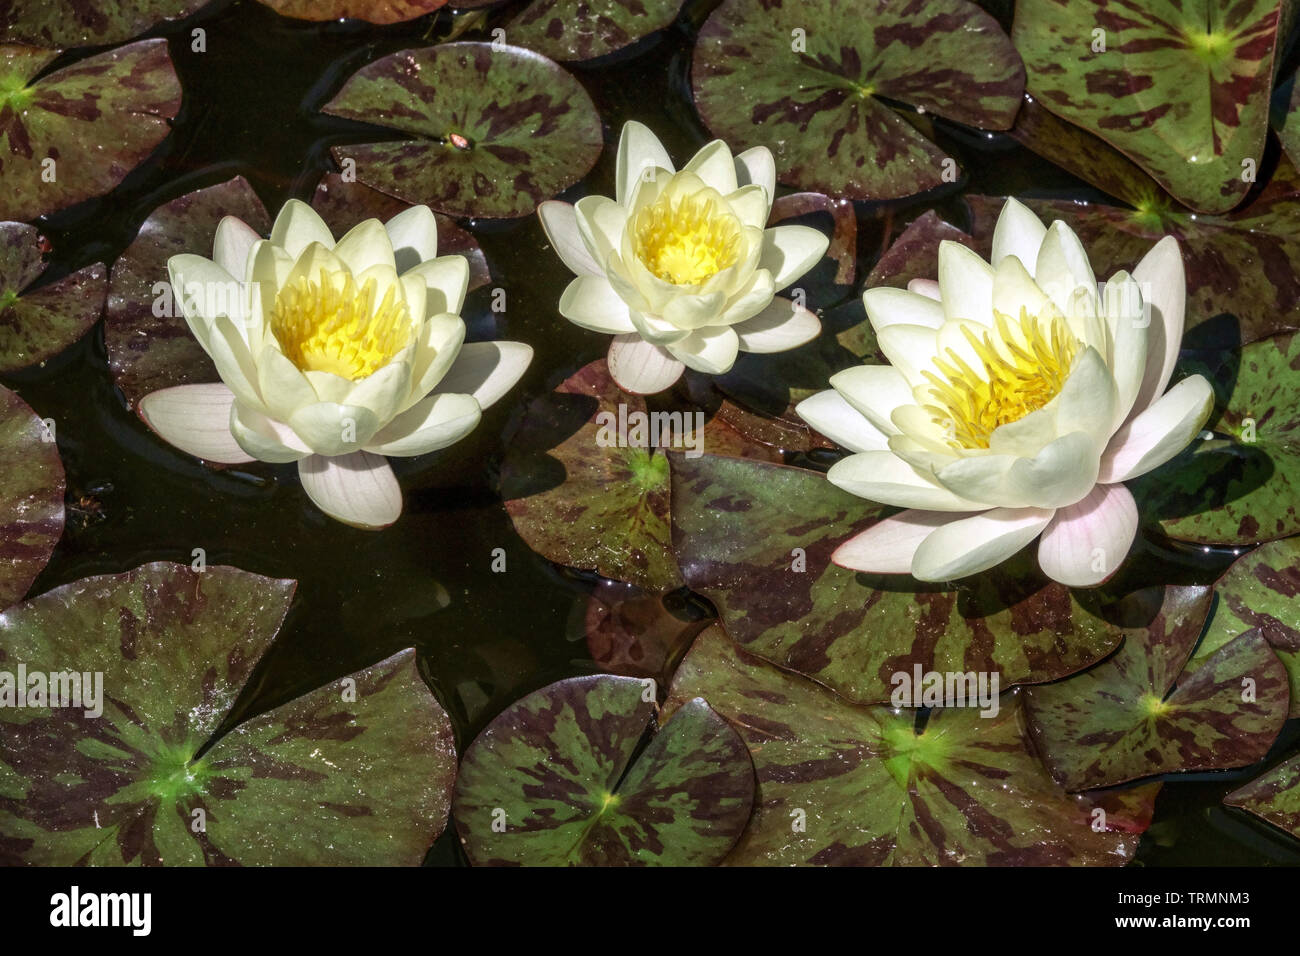 Water lily flower, white yellow flowers Nymphaea alba small garden pond Stock Photo